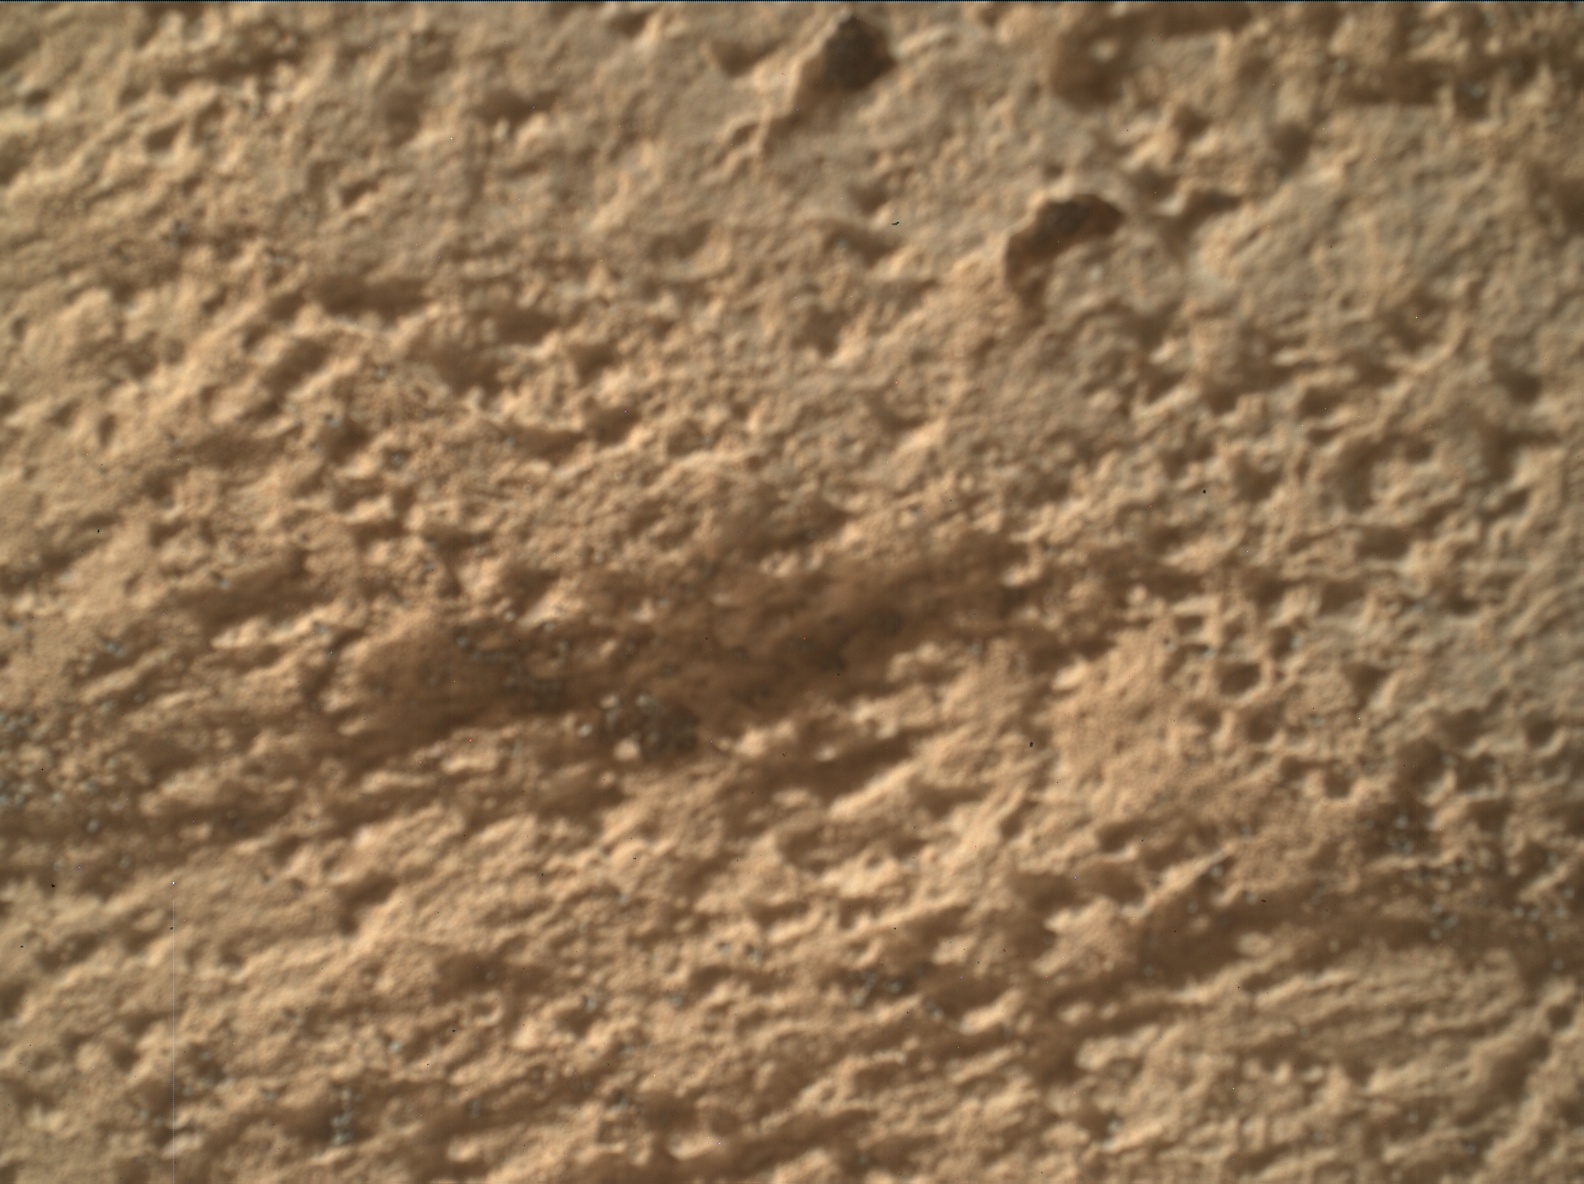 Nasa's Mars rover Curiosity acquired this image using its Mars Hand Lens Imager (MAHLI) on Sol 3205